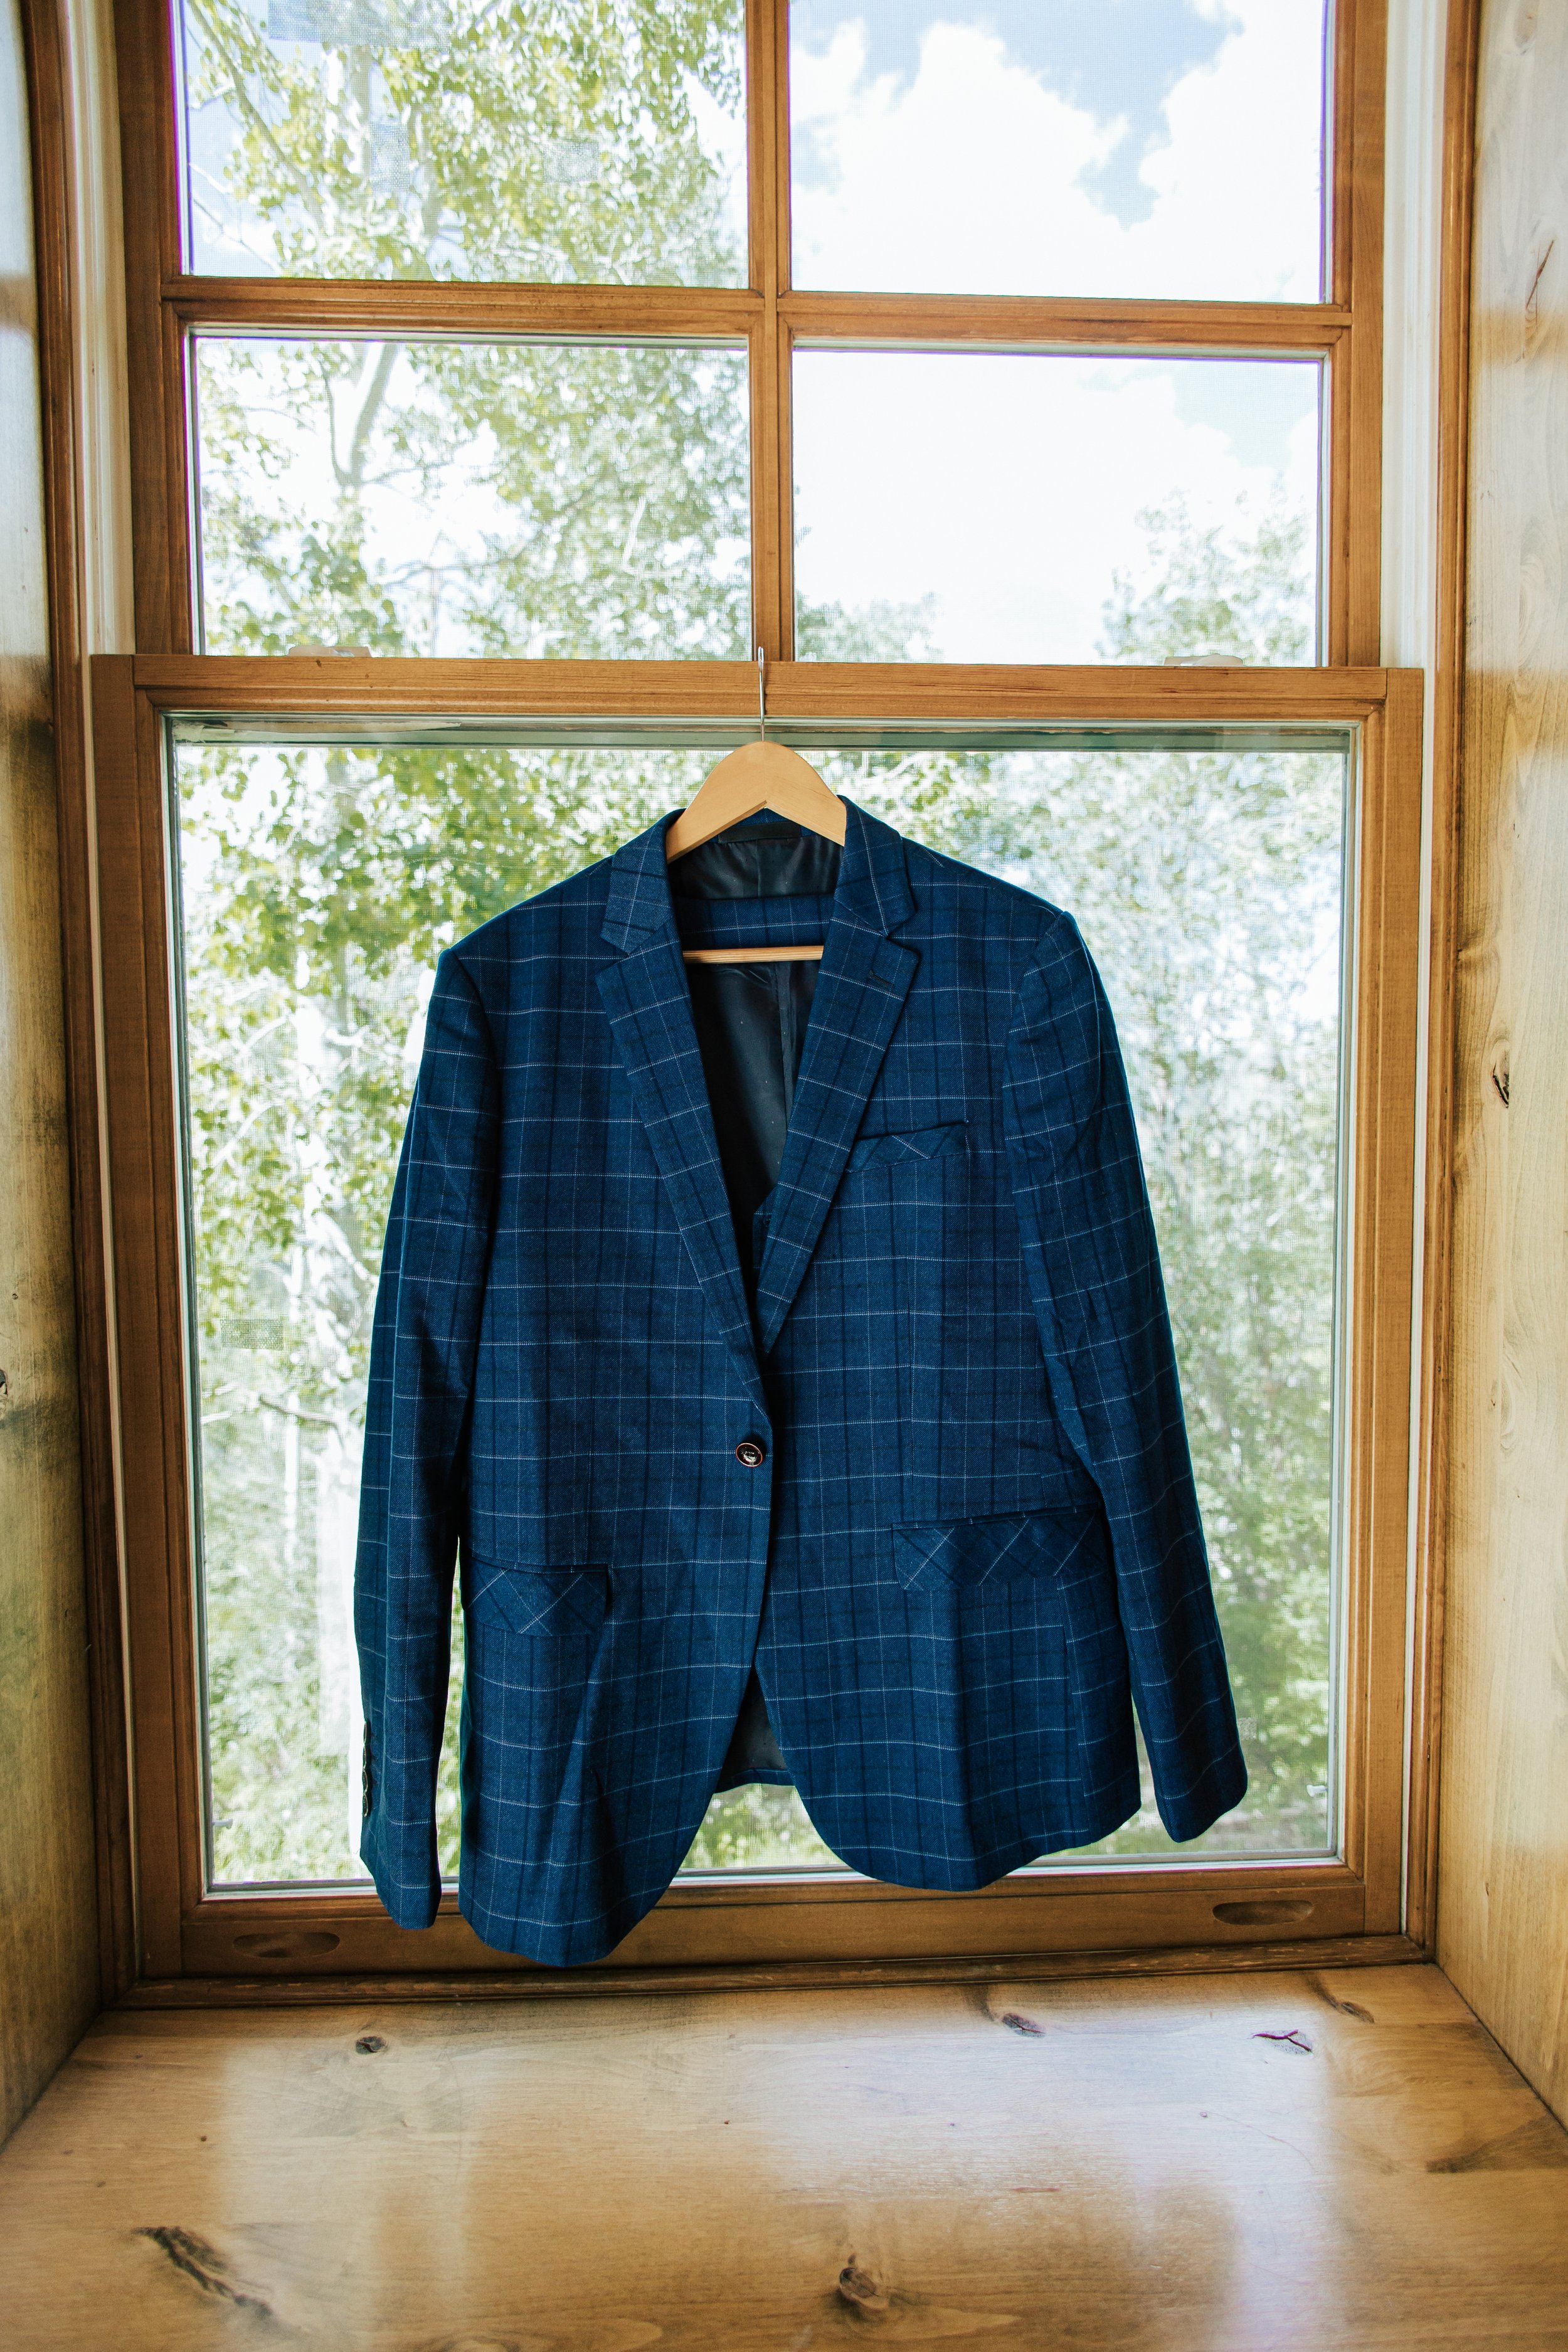  Groom’s navy blue striped suit coat hanging on window frame while groom is getting ready for wedding ceremony. 